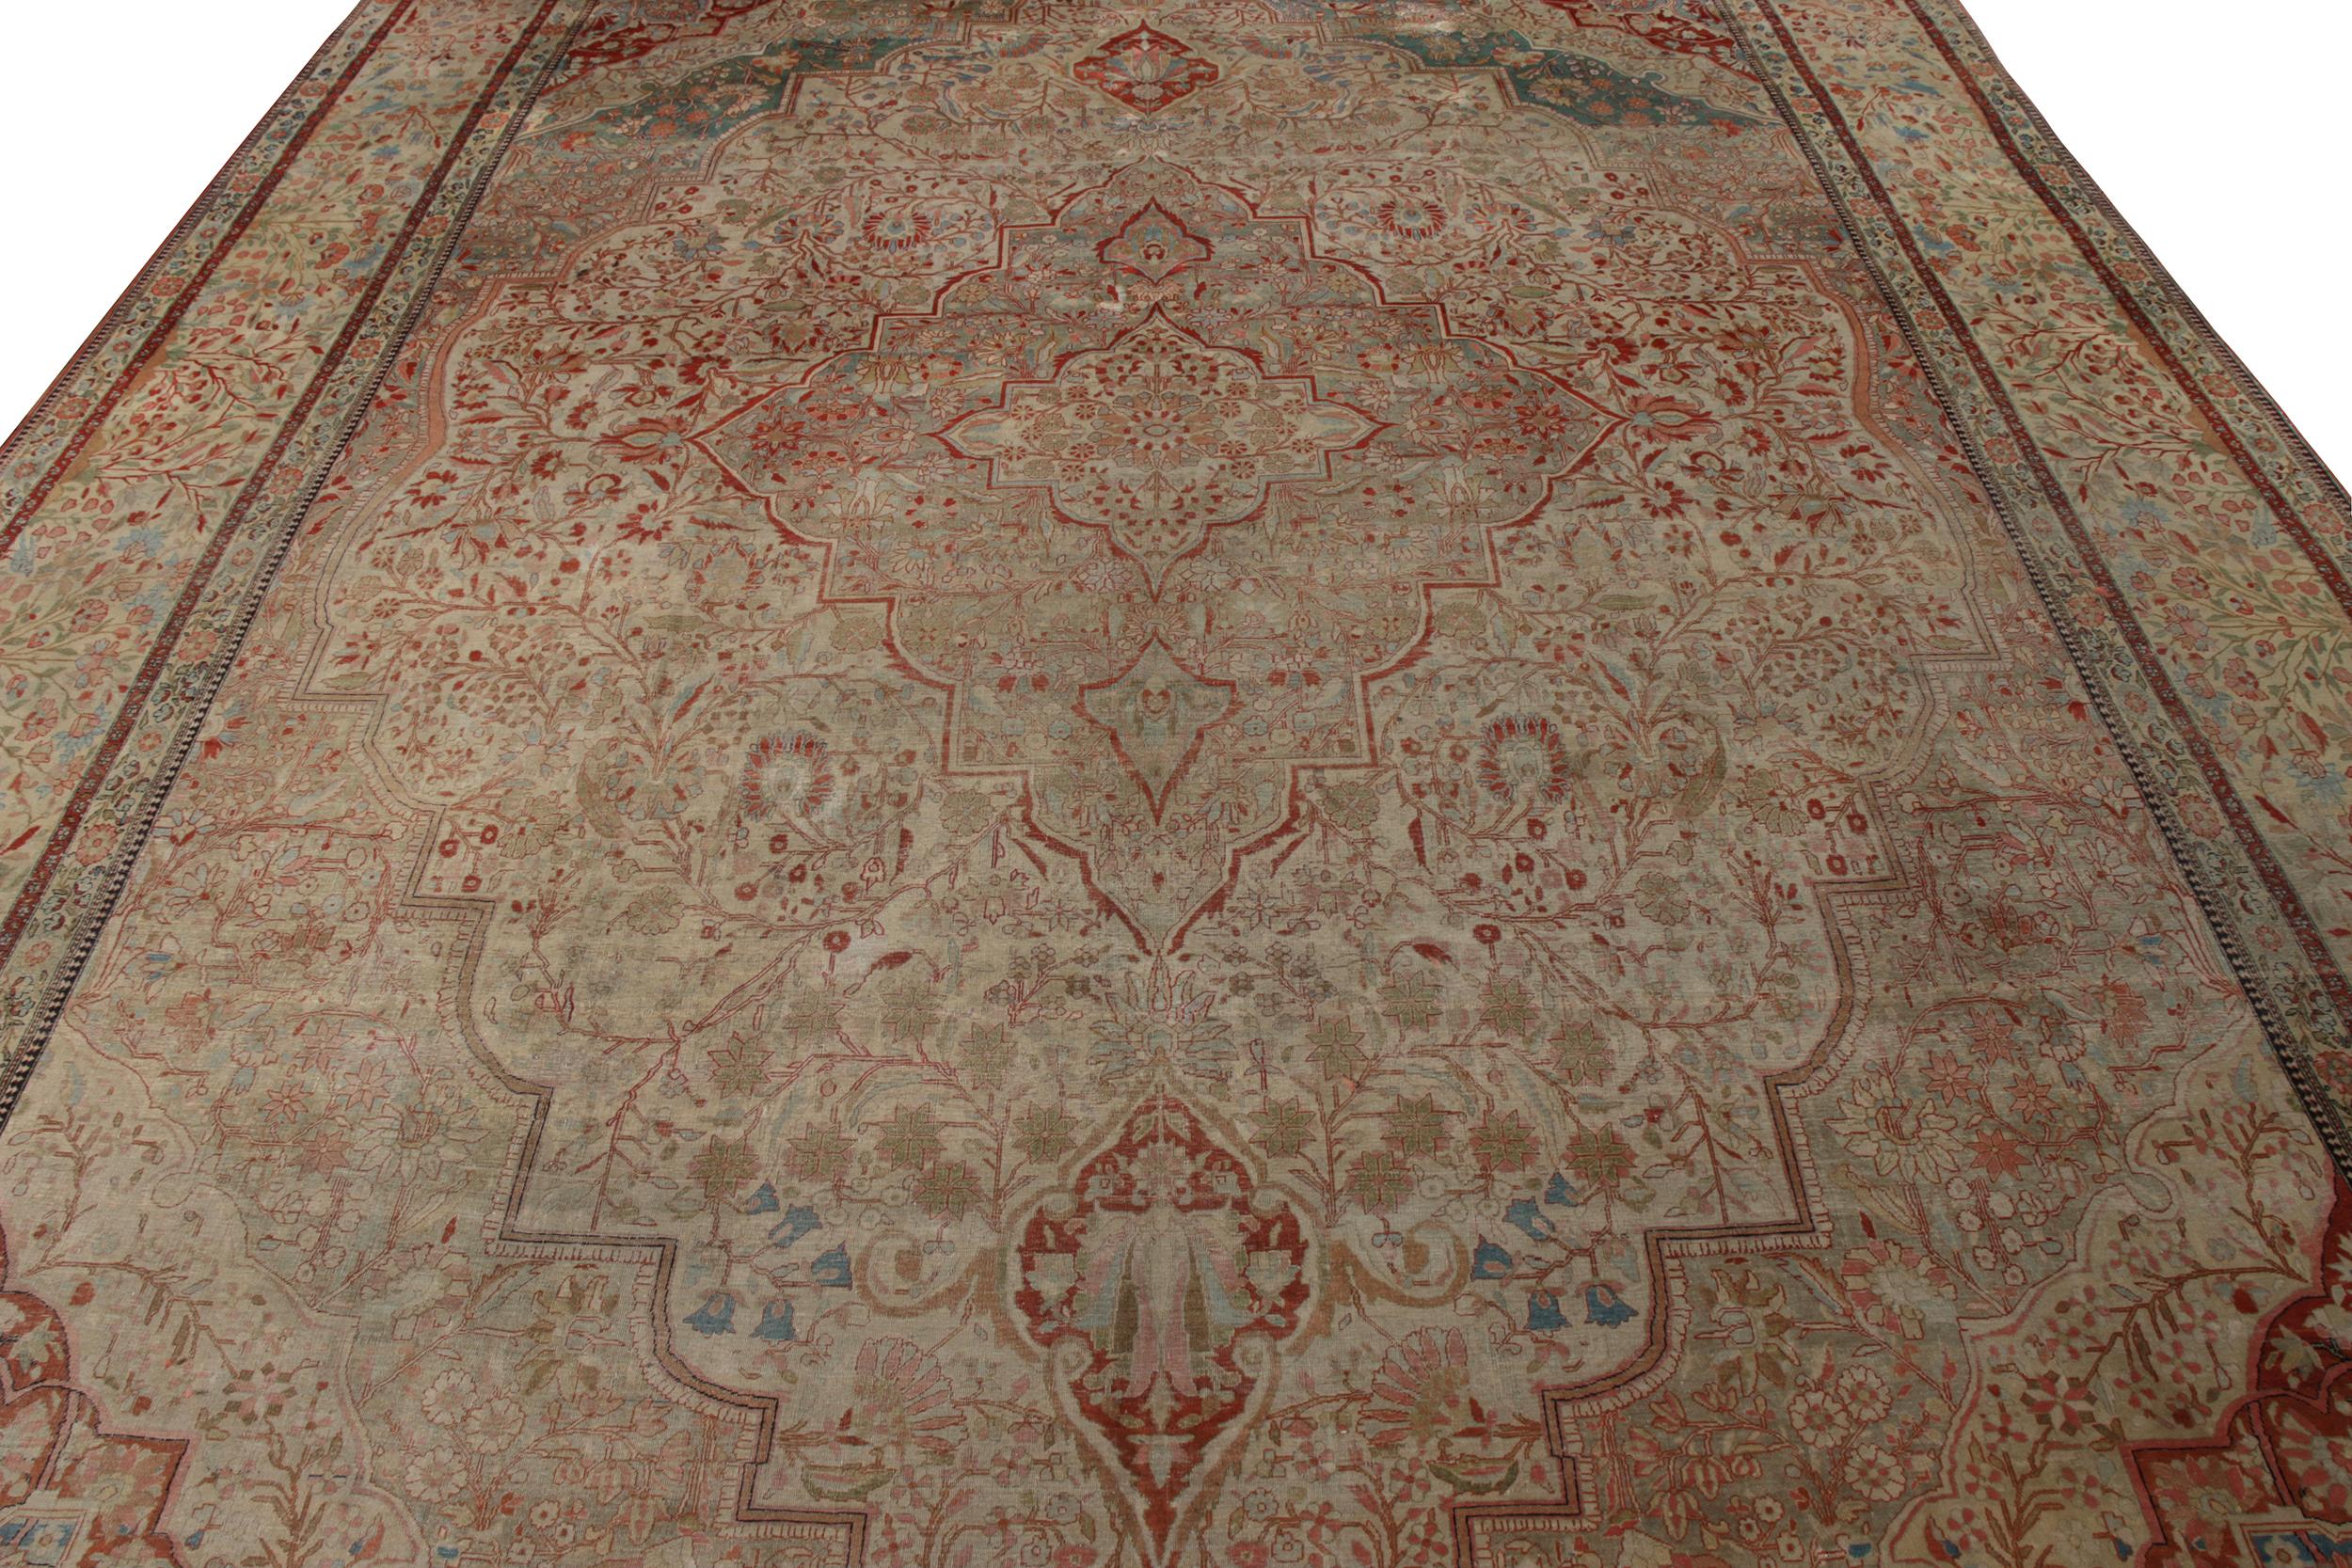 Hand knotted in wool originating from Turkey circa 1880-1900, this 10 x 14 antique rug connotes a regal Mohtashem rug style, prized among the most venerated Classic weavers of the period for distinguished creations like this large-size, regal